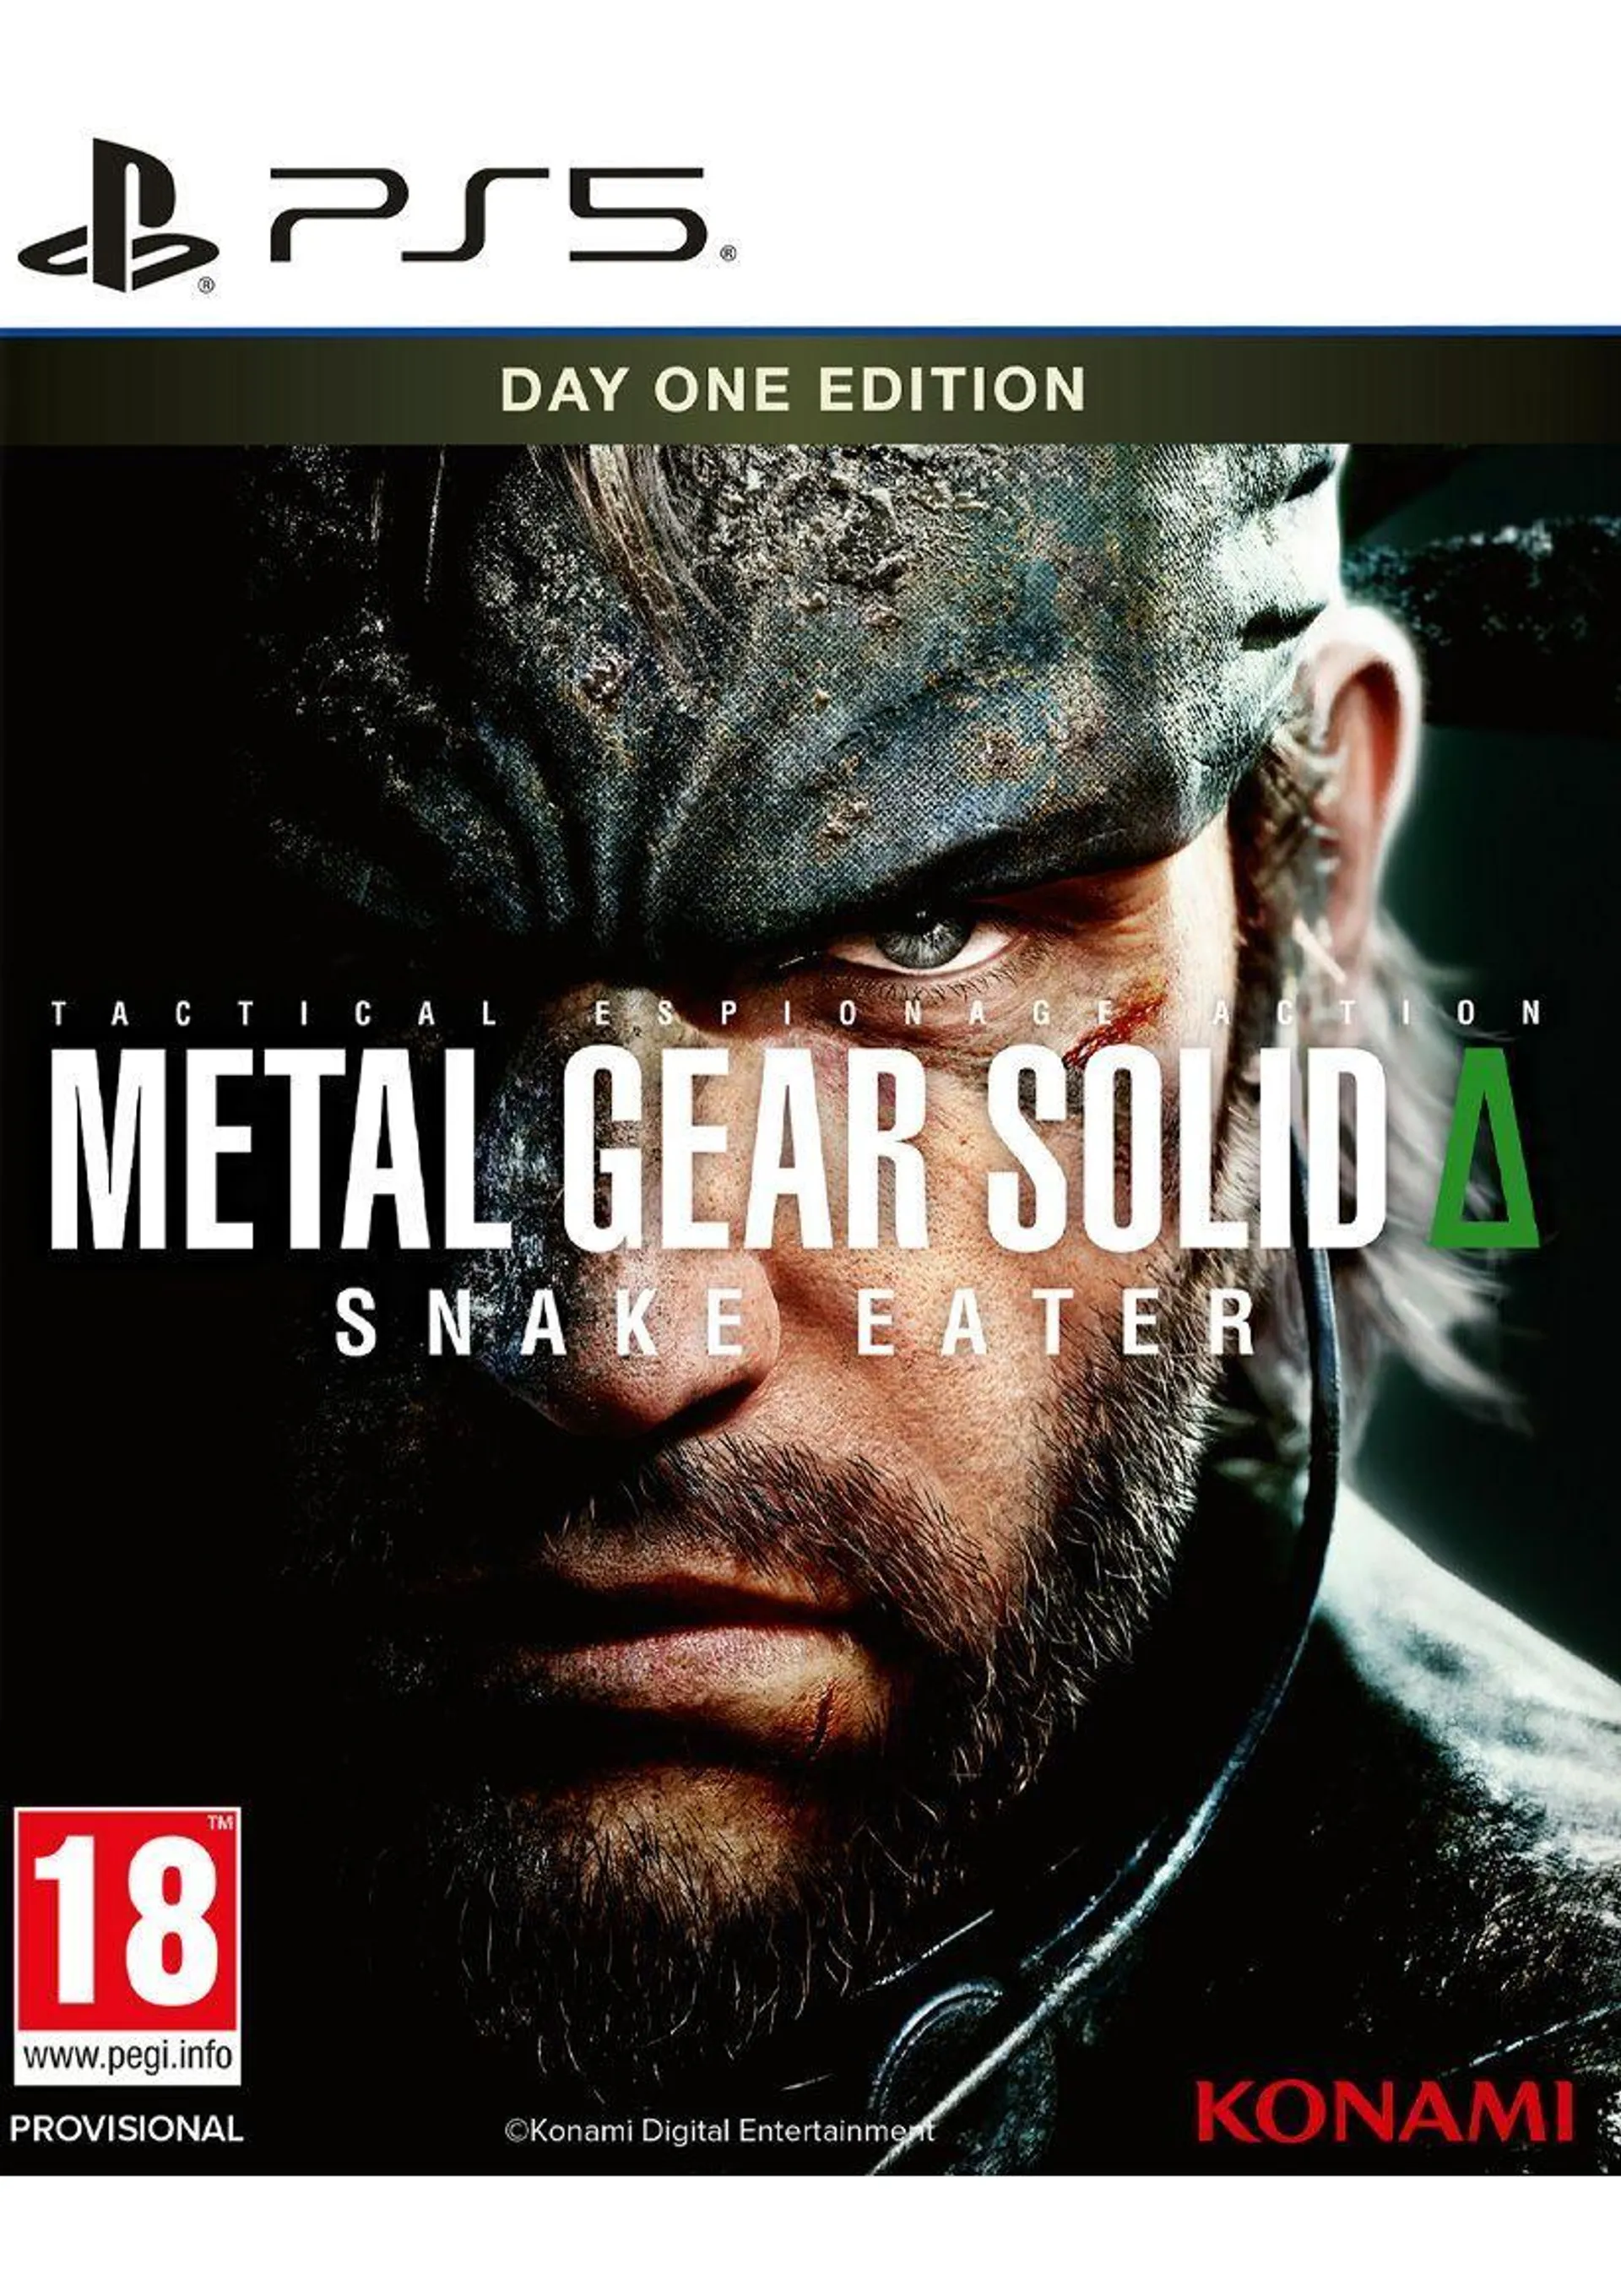 Metal Gear Solid Delta: Snake Eater Day 1 Edition on PlayStation 5